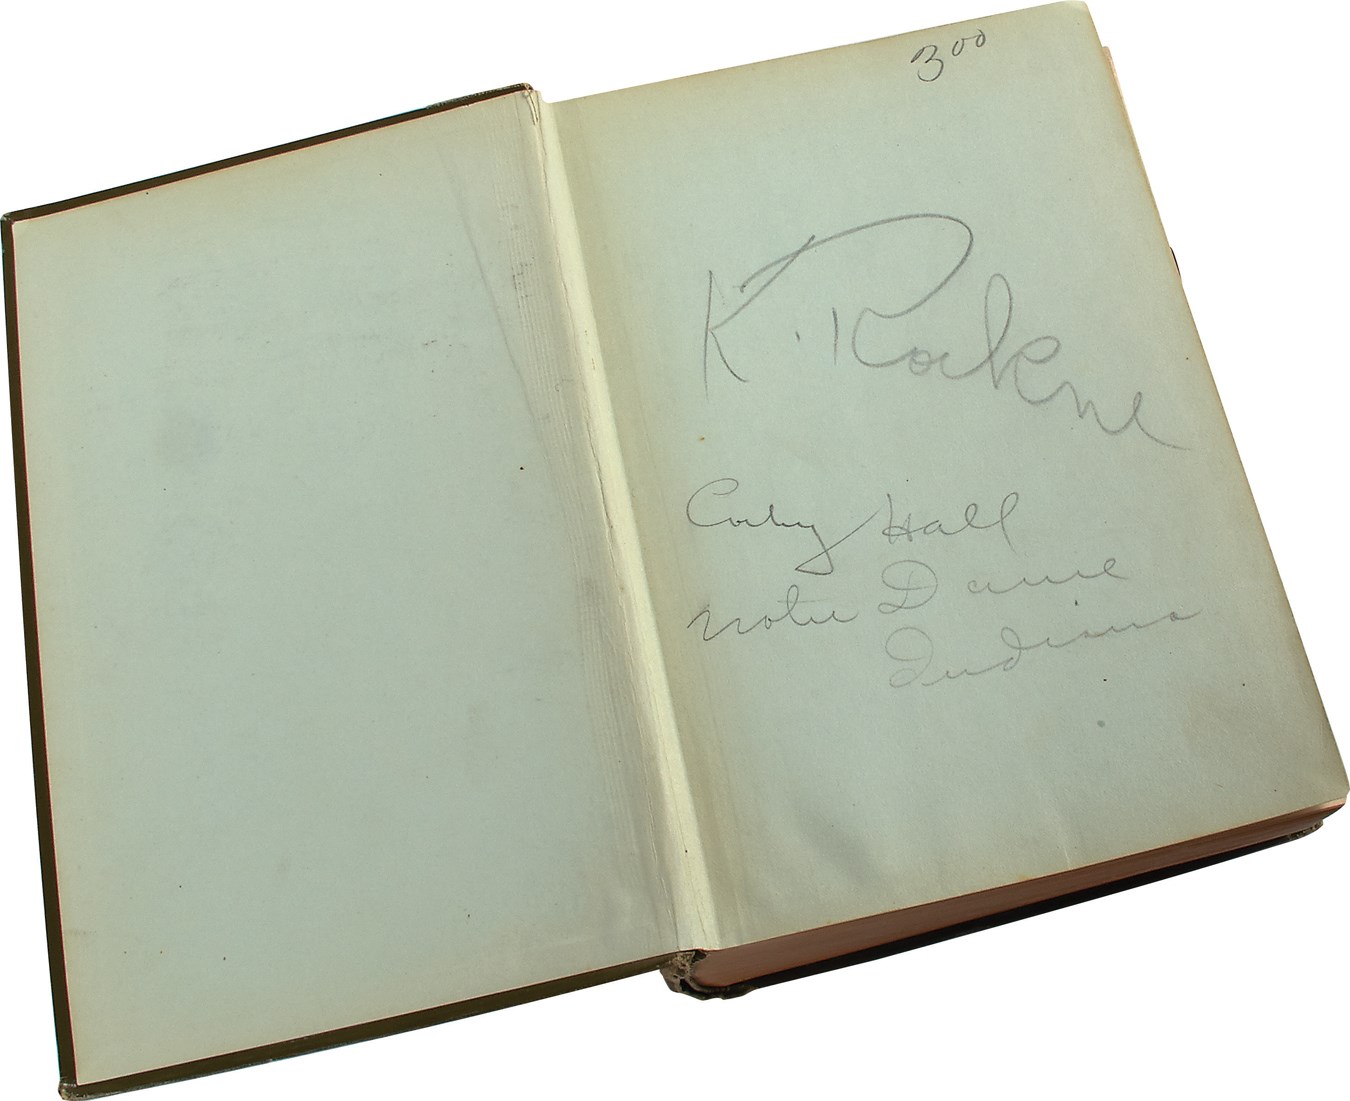 Football - 1911 Knute Rockne Signed, Personally-Owned Student Book at Notre Dame - Family Sourced (JSA)